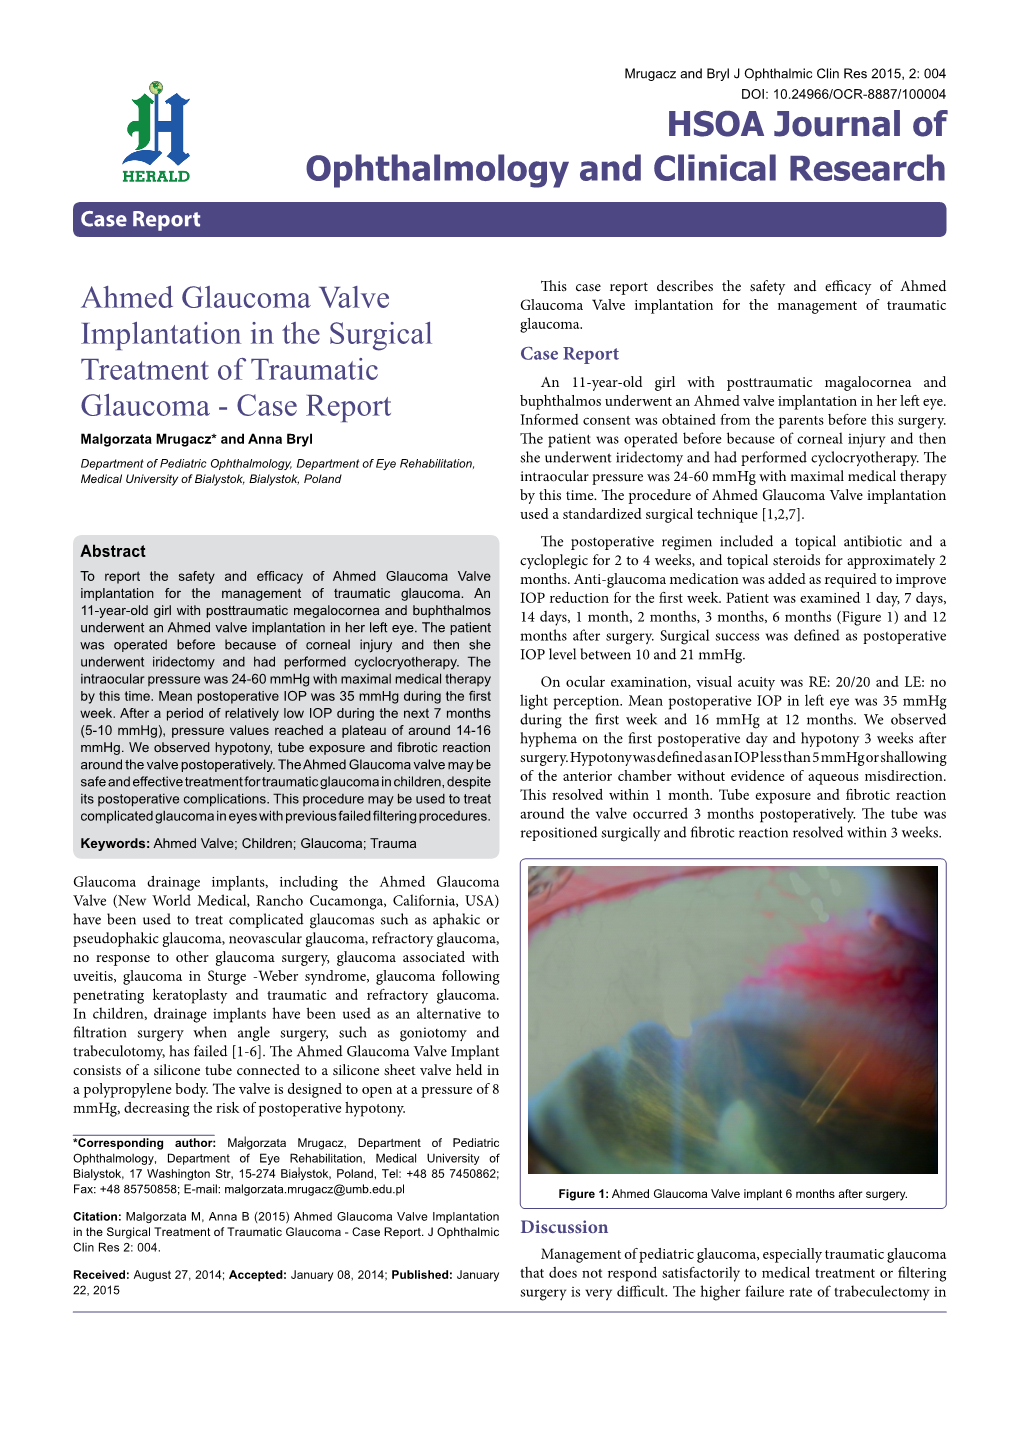 Ahmed Glaucoma Valve Implantation in the Surgical Treatment of Traumatic Glaucoma - Case Report